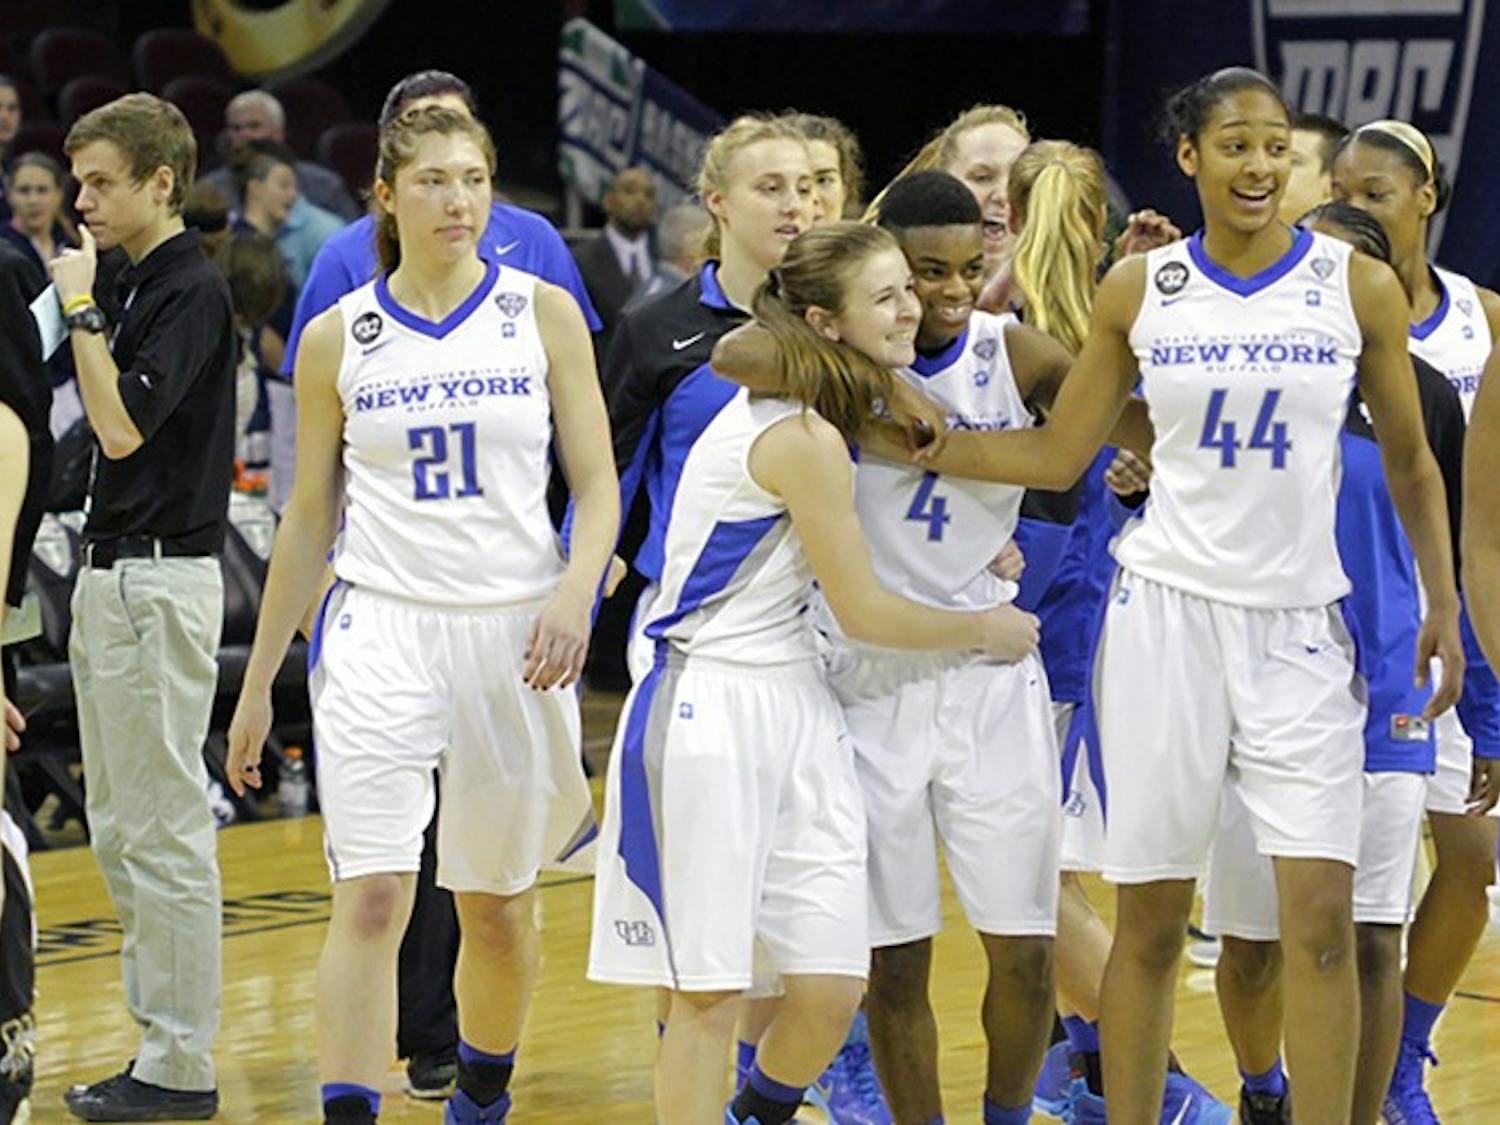 The UB Bulls celebrate after a quarterfinals victory over Western Michigan.